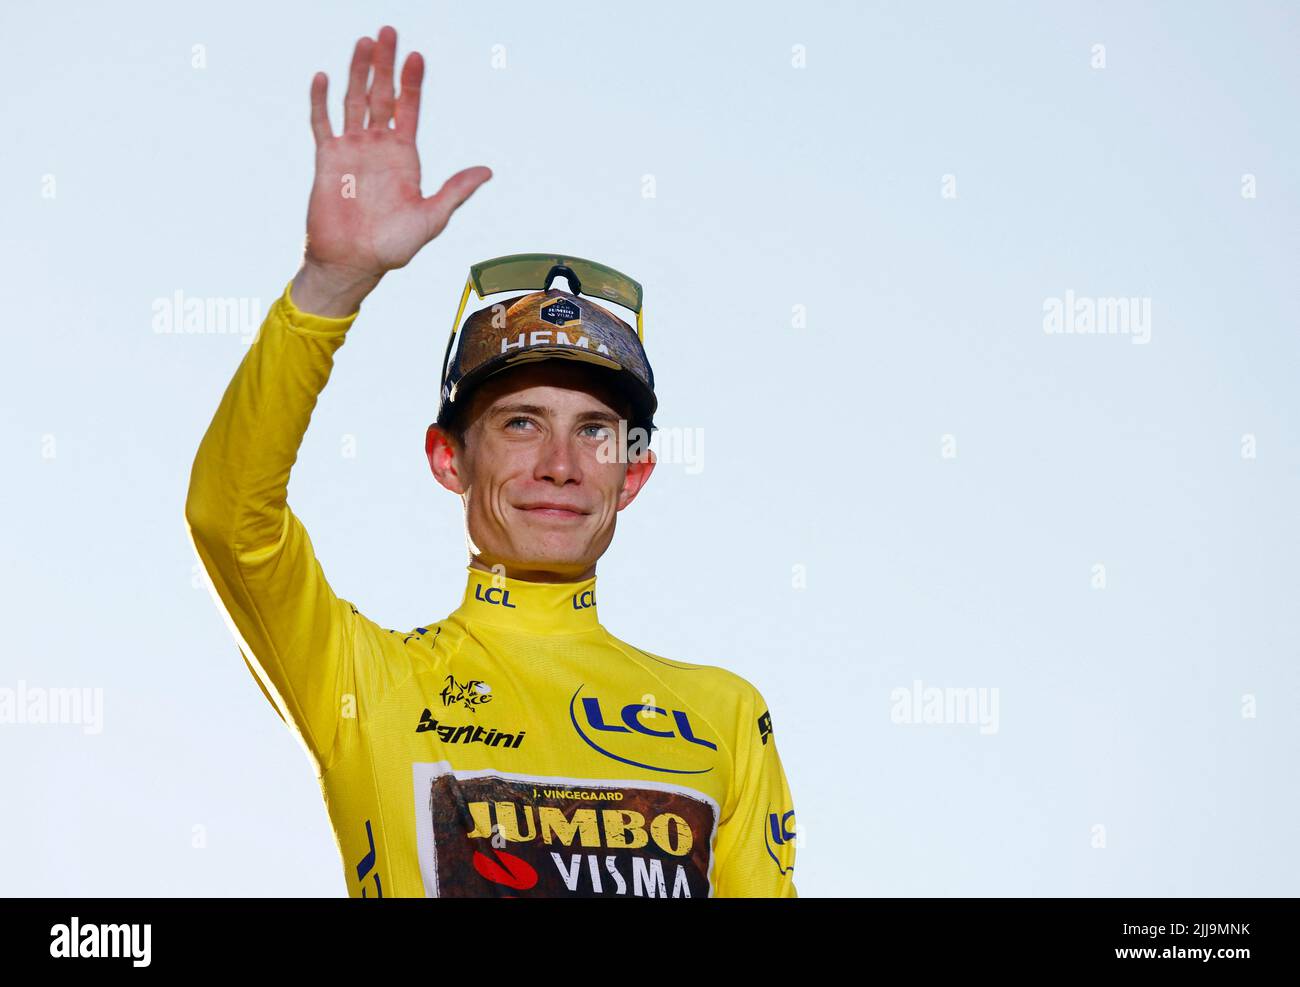 Cycling - Tour de France - Stage 21 - Paris La Defense Arena to Champs-Elysees - France - July 24, 2022 Jumbo - Visma's Jonas Vingegaard celebrates on the podium wearing the overall leader's yellow jersey after winning the Tour de France REUTERS/Gonzalo Fuentes Stock Photo